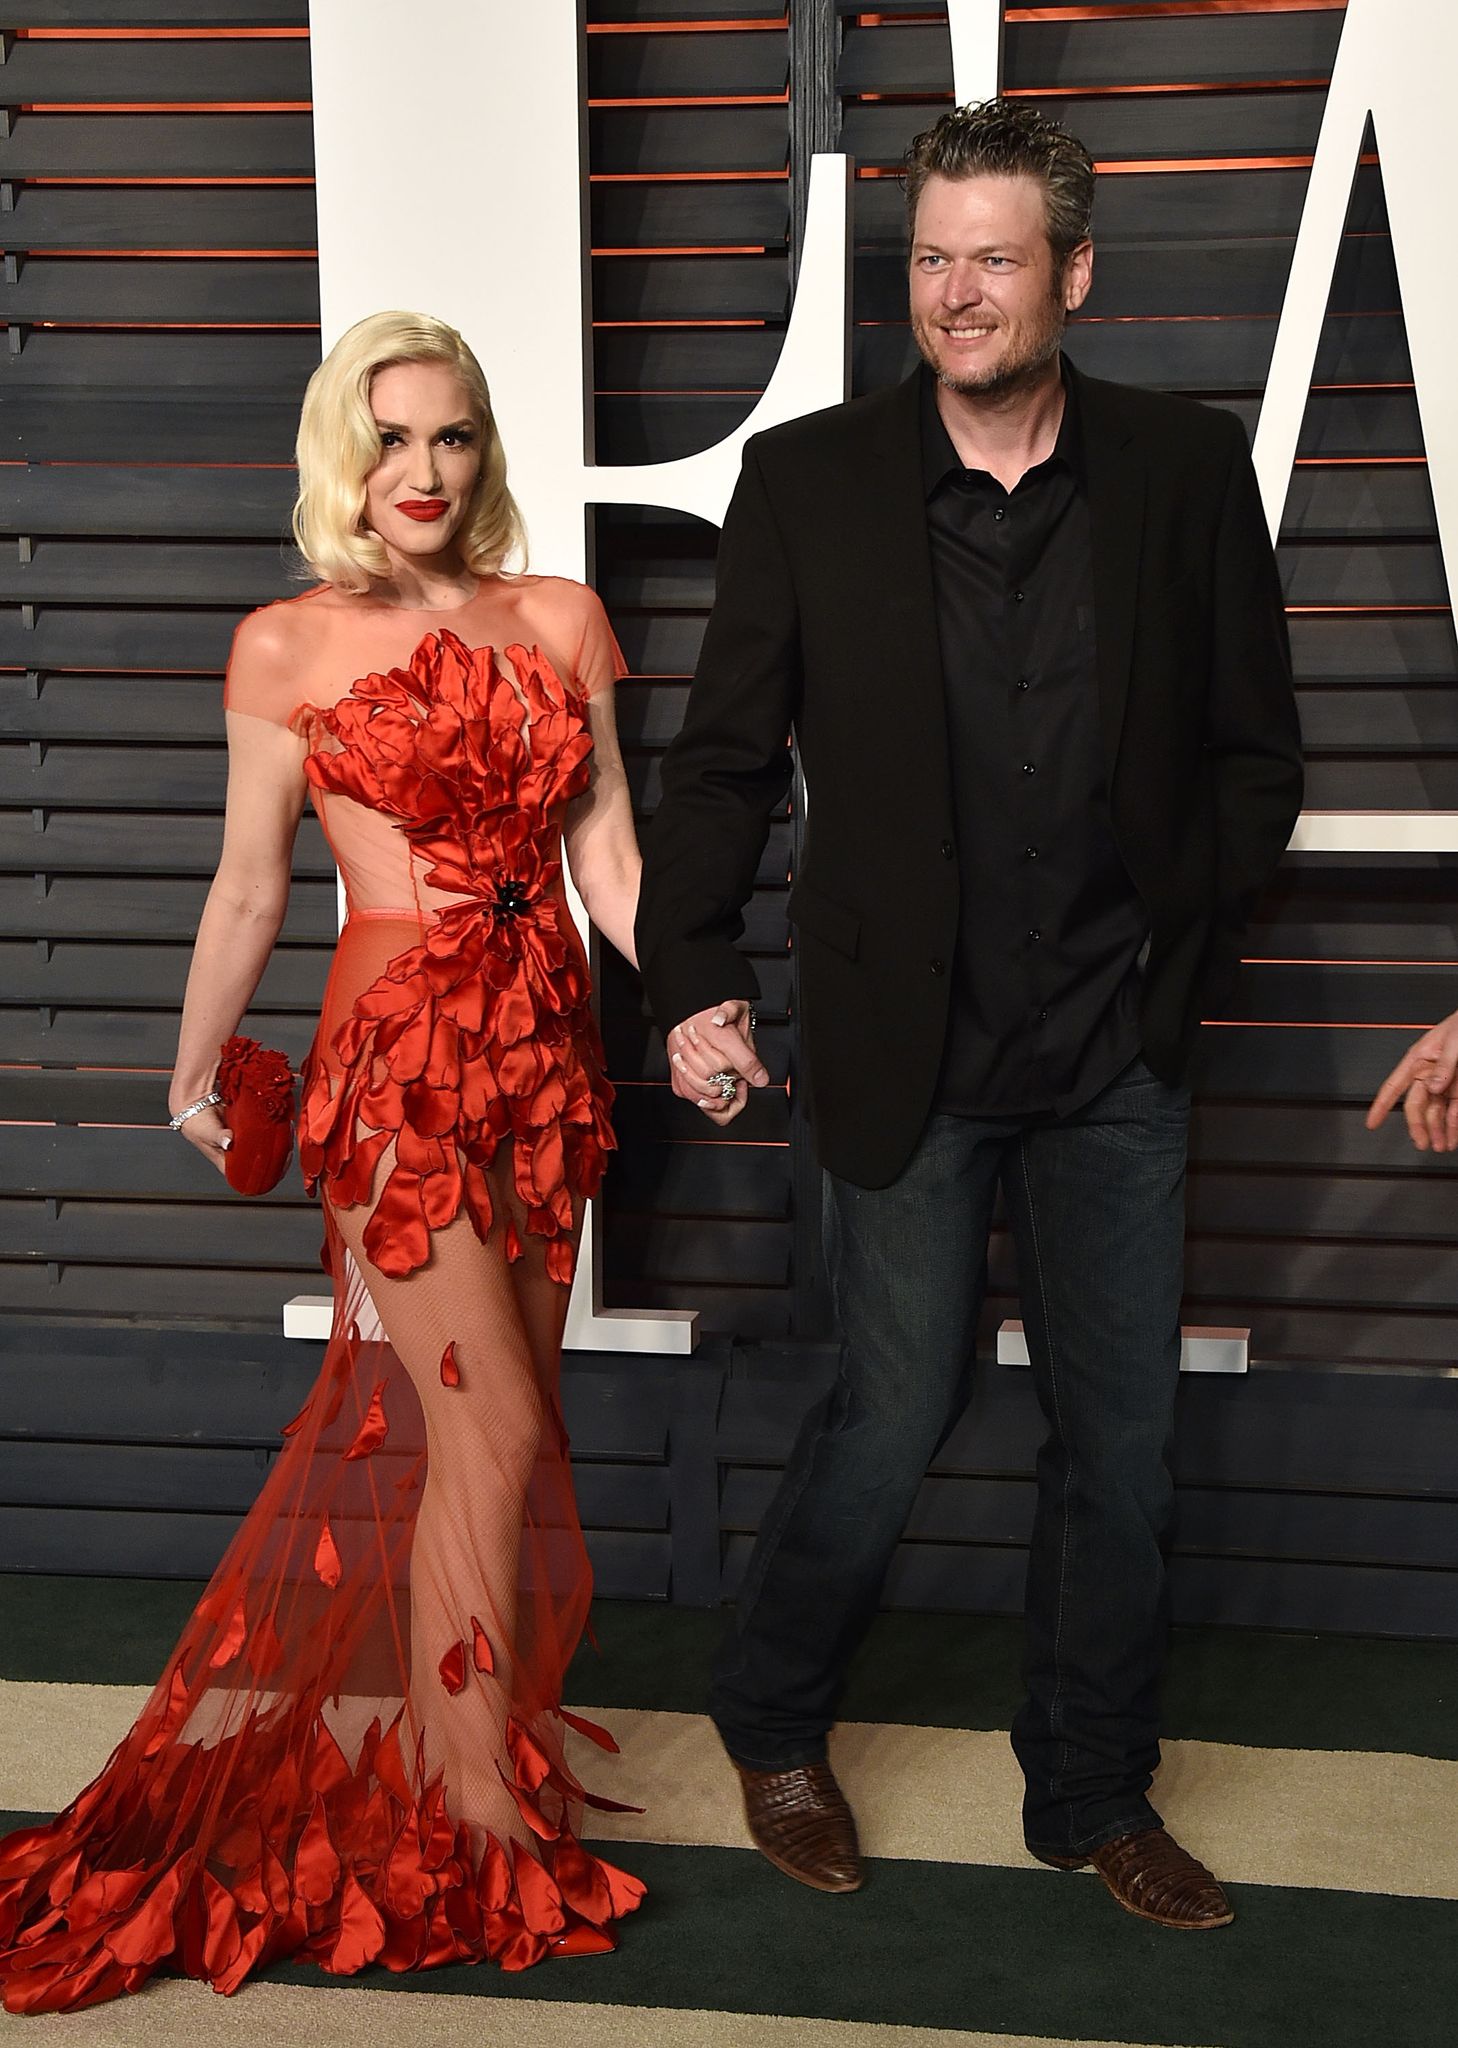 ecording artists Gwen Stefani (L) and Blake Shelton arrive at the 2016 Vanity Fair Oscar Party Hosted By Graydon Carter  | Getty Images